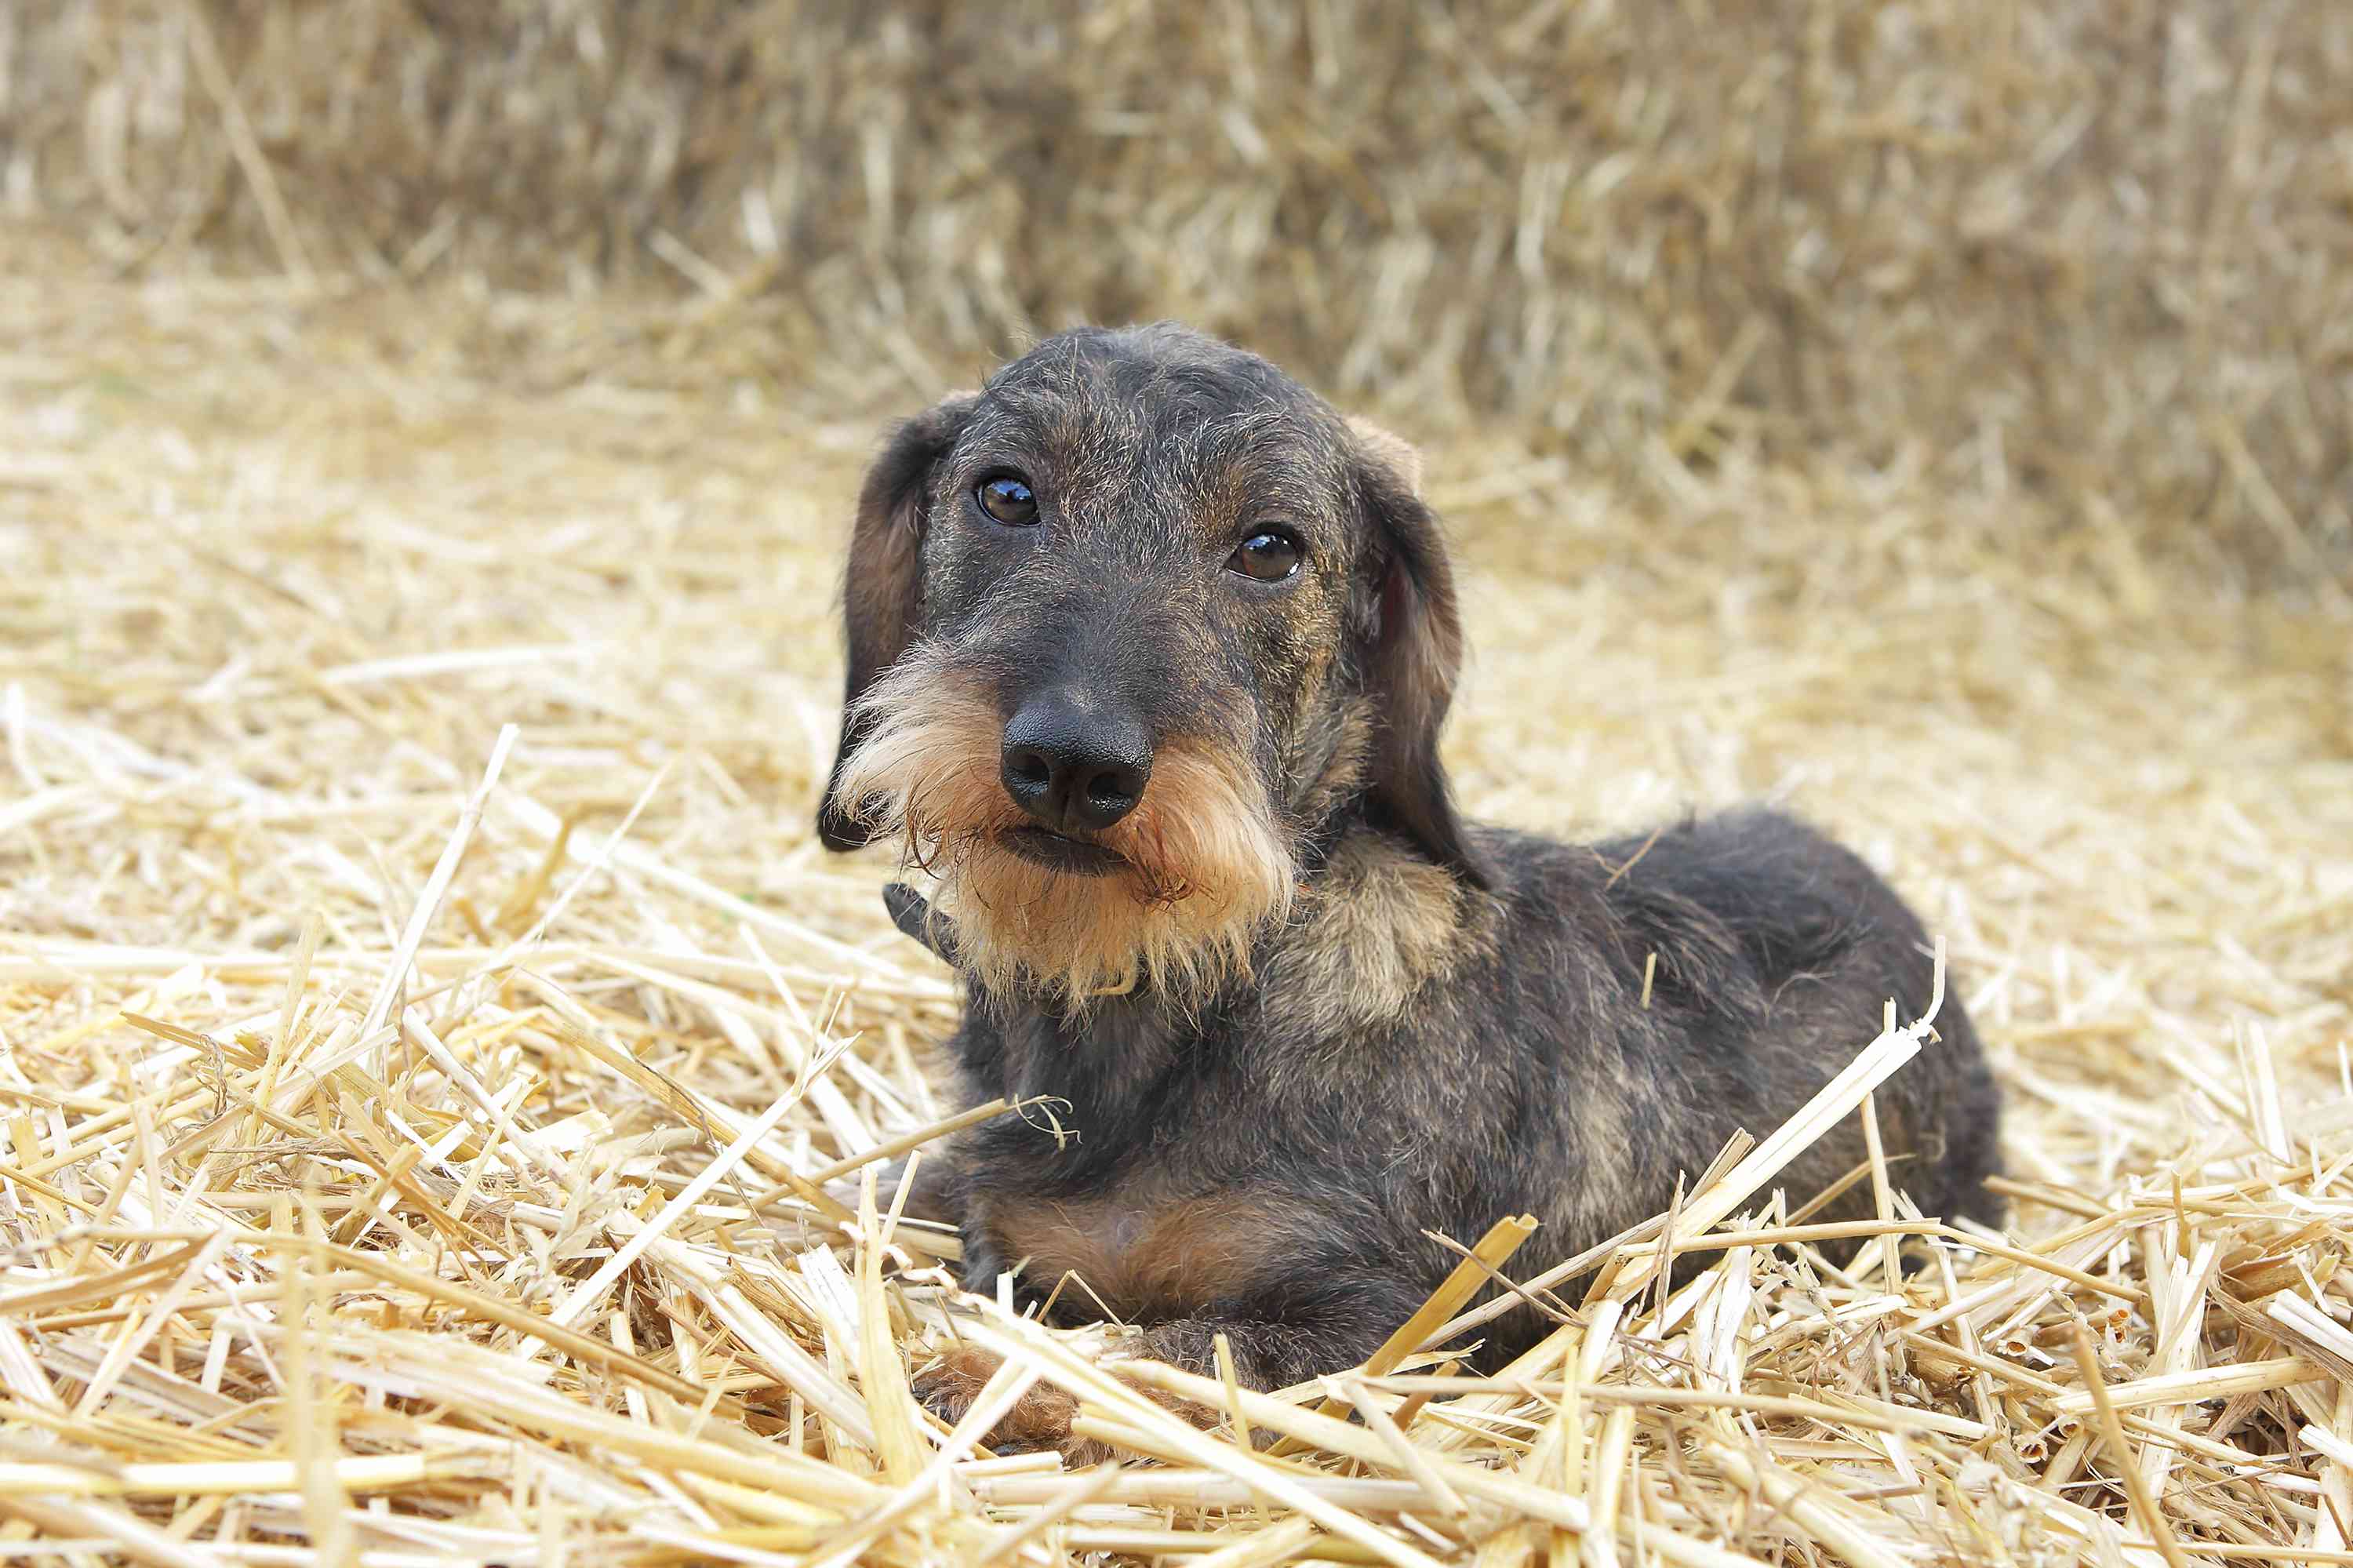 Wirehaired Dachshund lying in straw